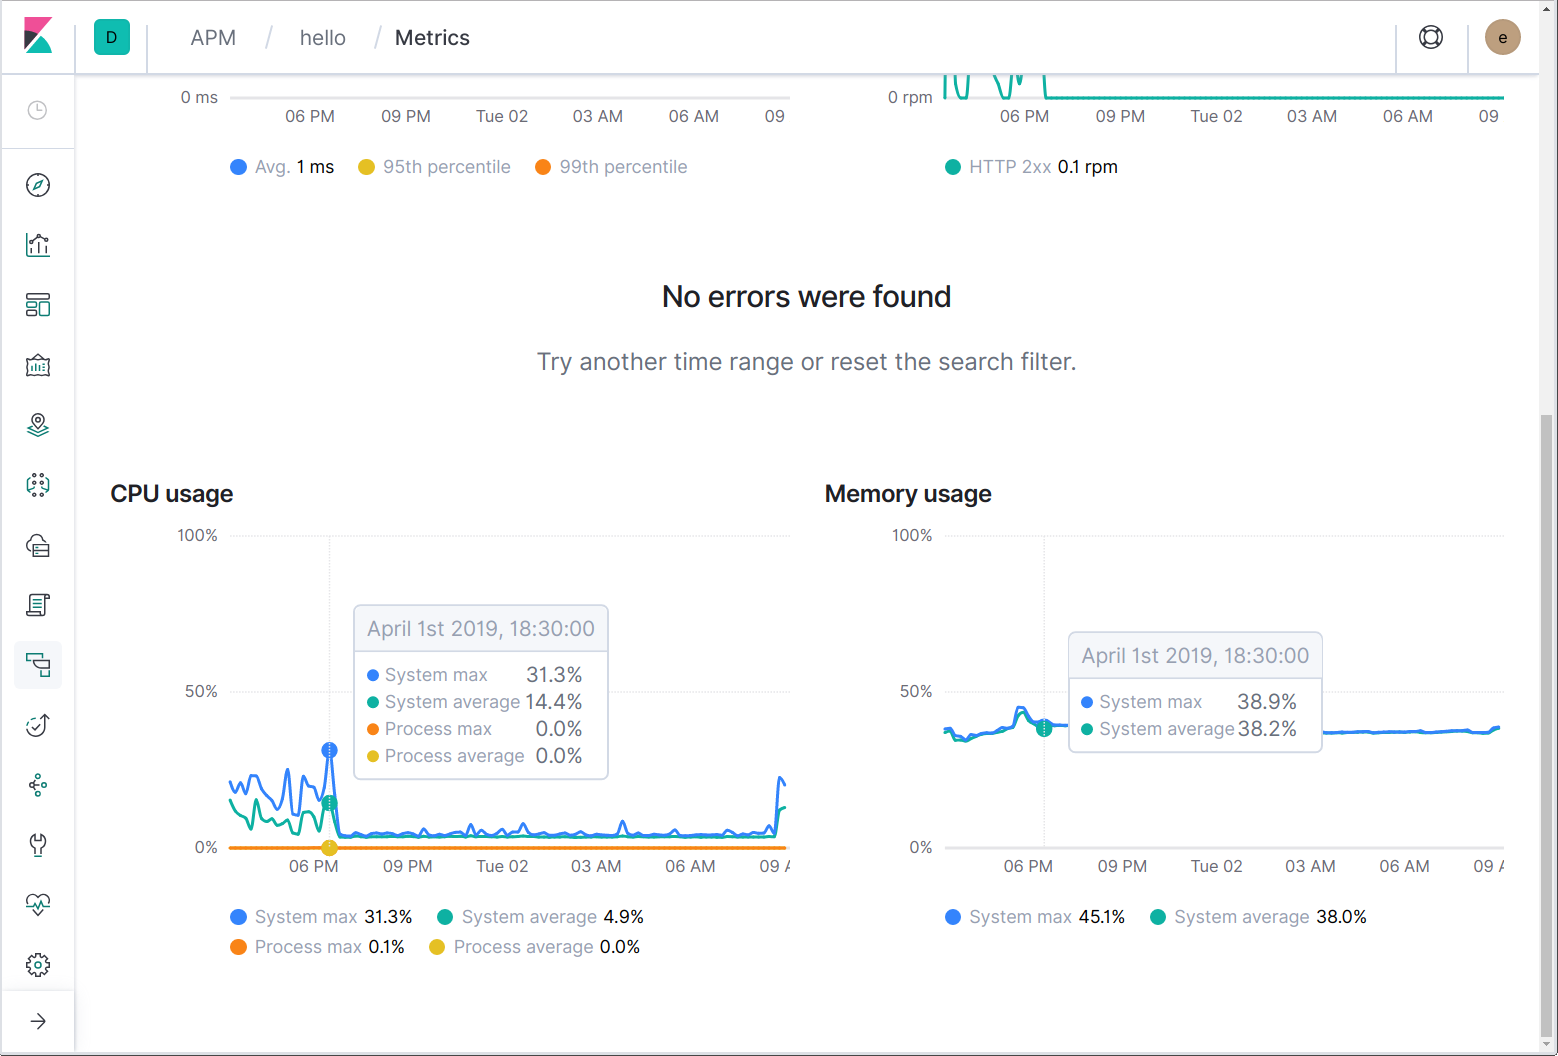 Tracking infrastructure metrics with Elastic APM